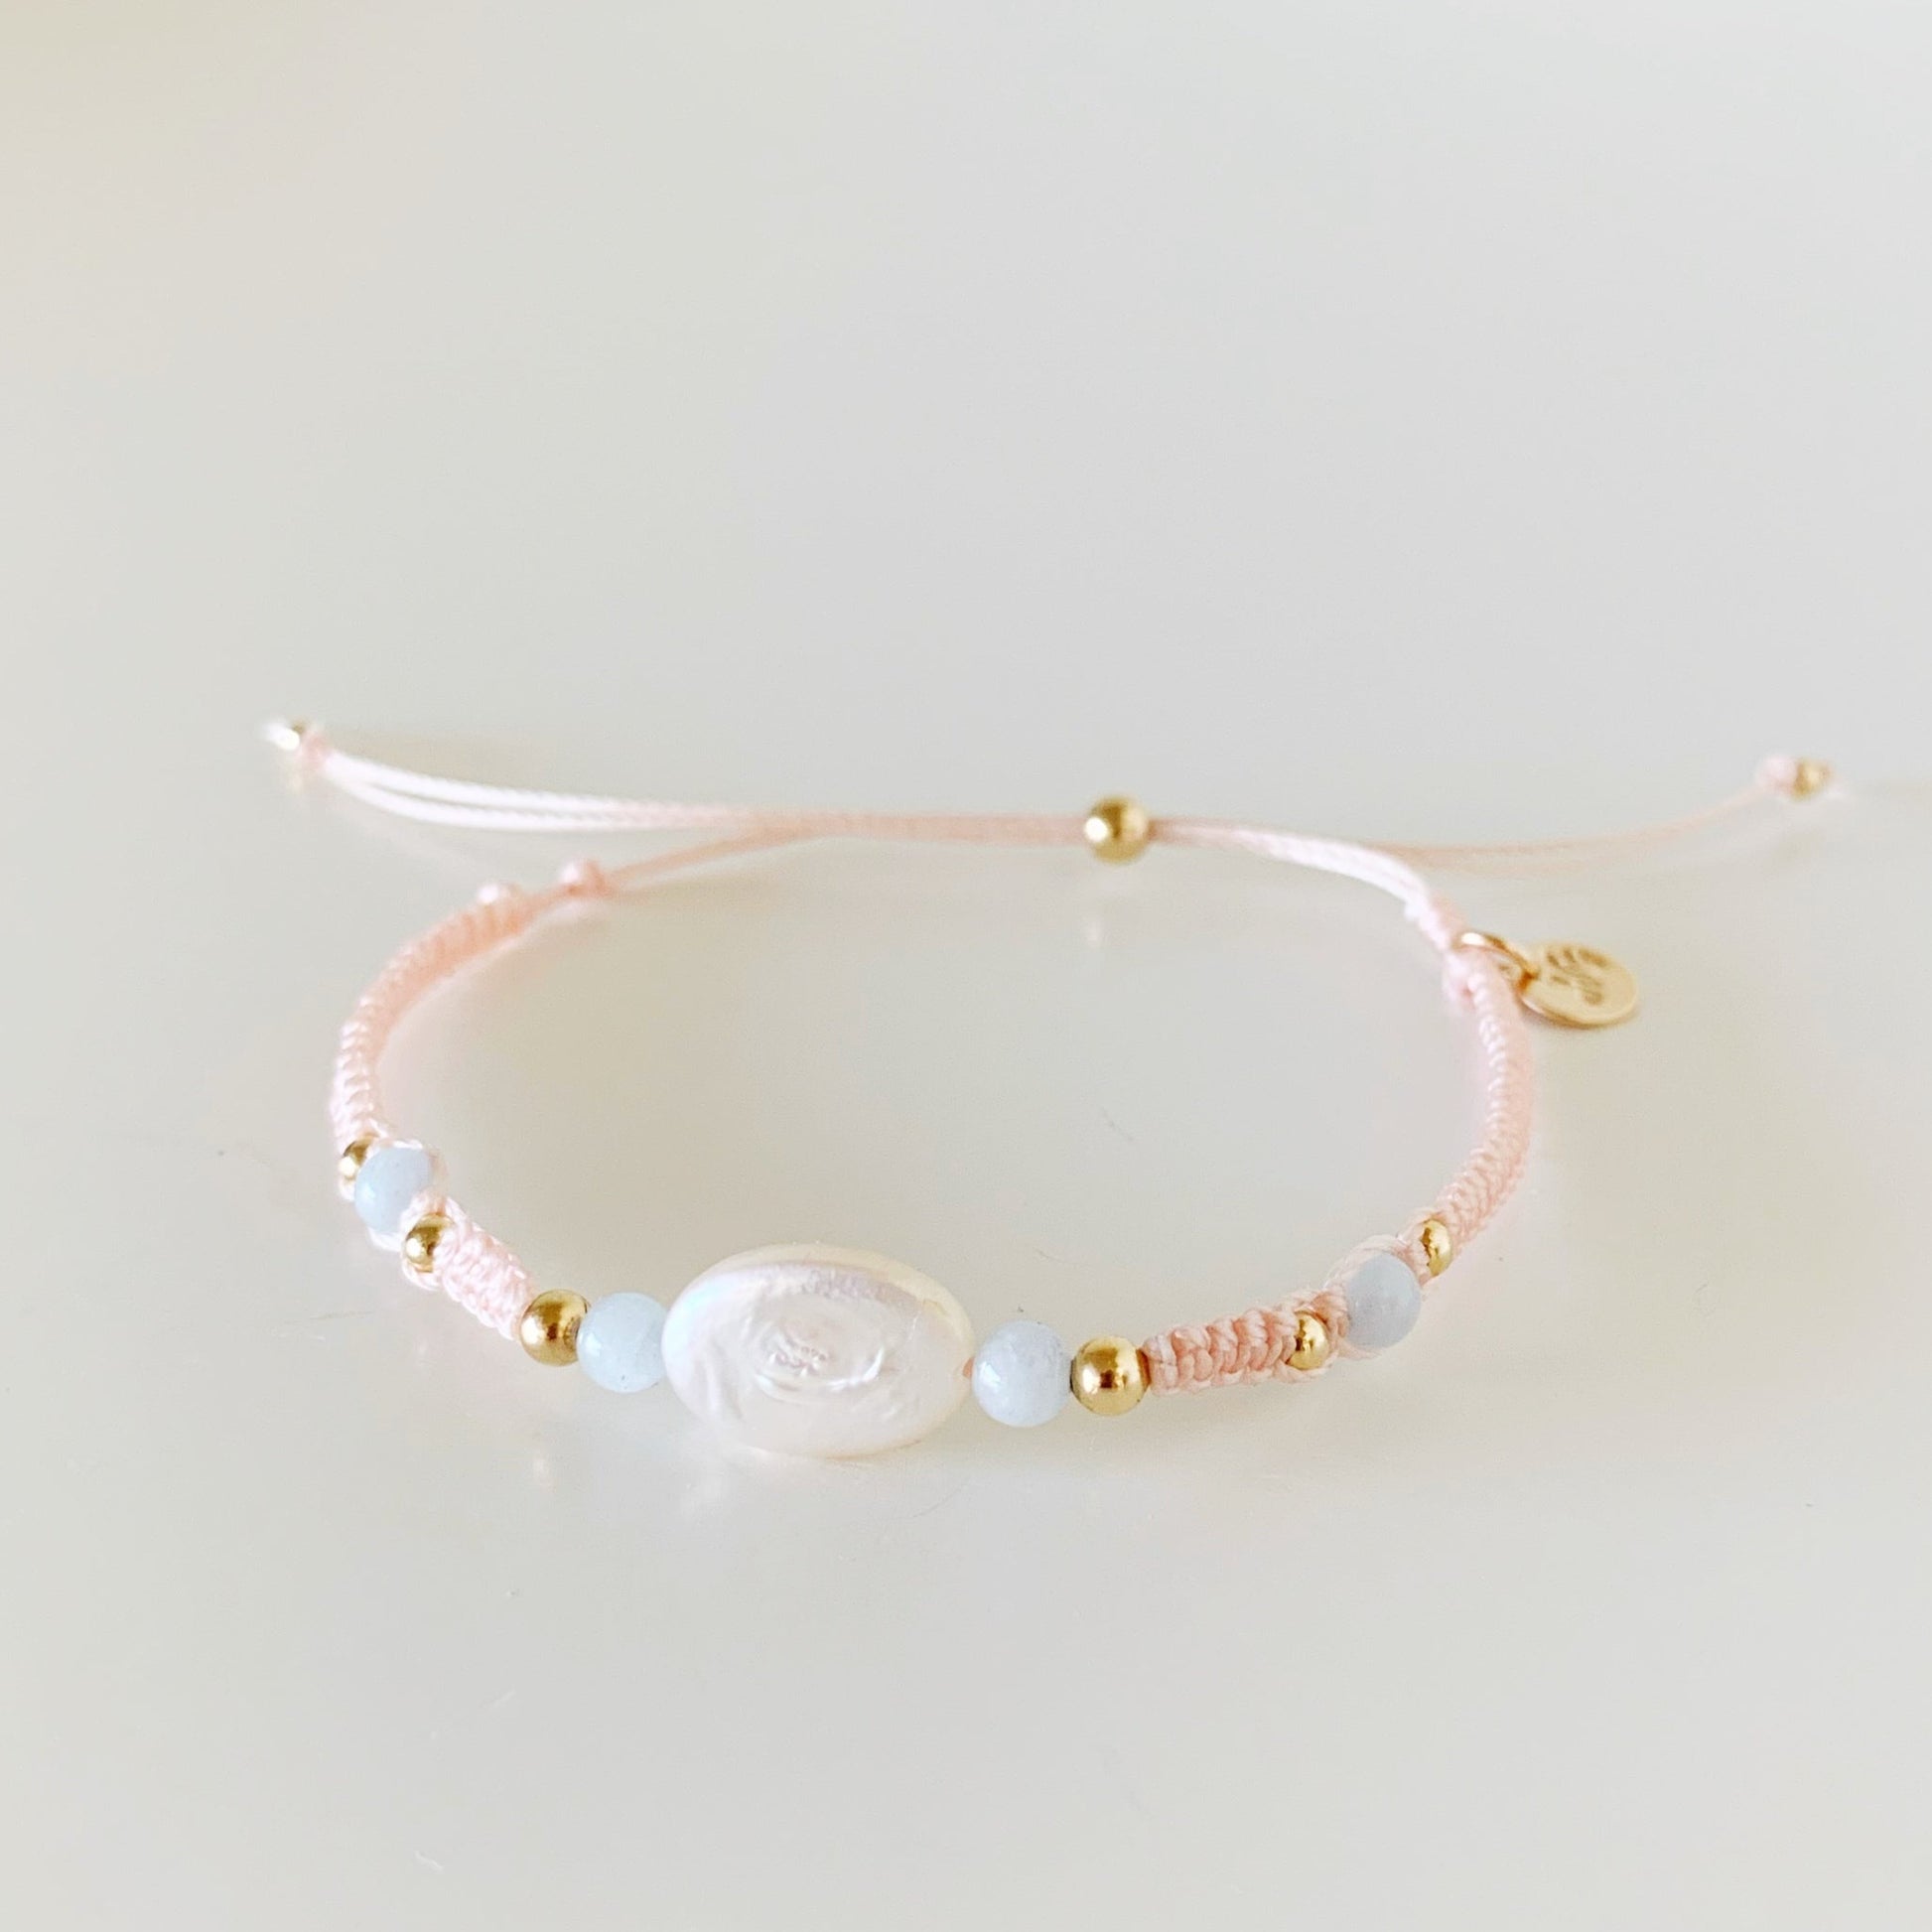 happy as a clam bracelet by mermaids and madeleines is an adjustable macrame style with pastel blush cord with a freshwater oval pearl at the center with 4mm round aqumarine beads on either side. this bracelet is photographed from the front on a white surface